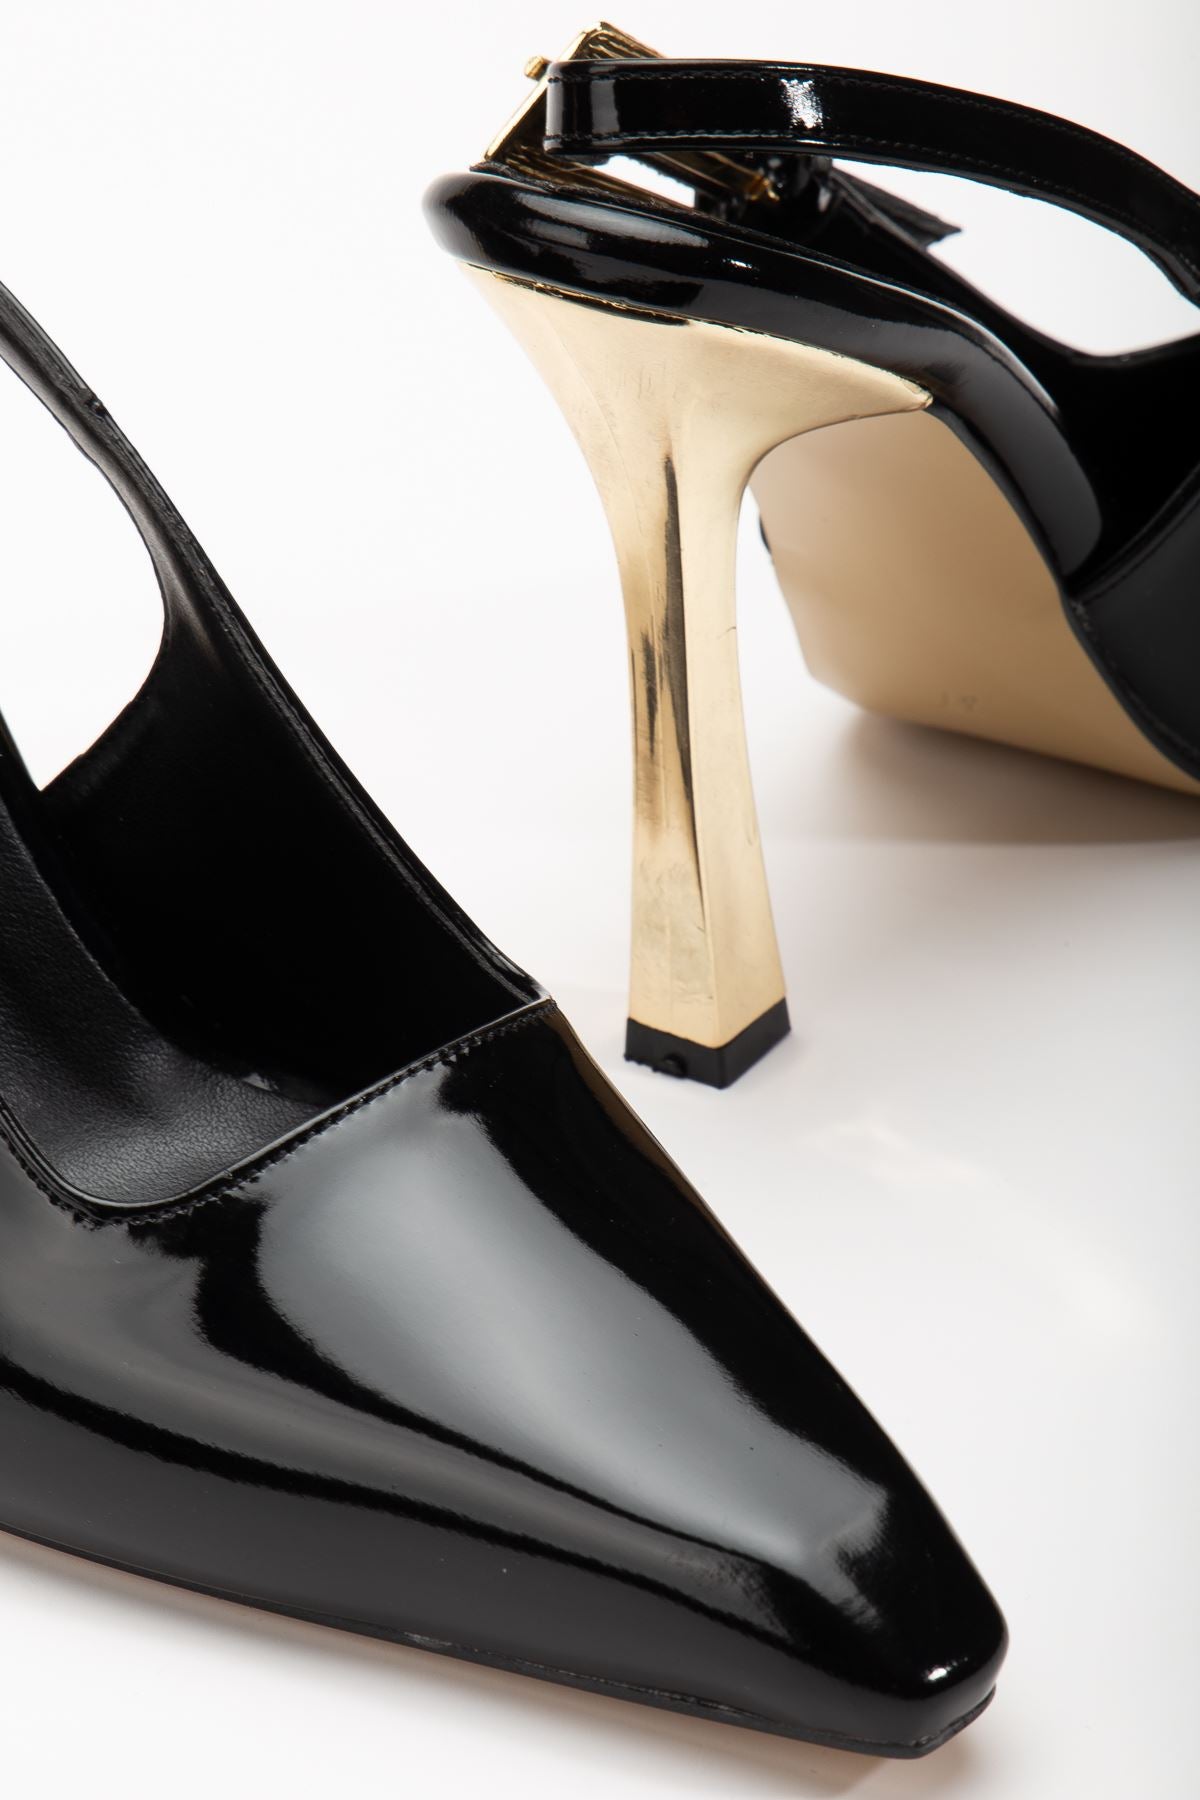 Minni Black Patent Leather Gold Detailed Blunt Toe Women's Heeled Shoes - STREETMODE™